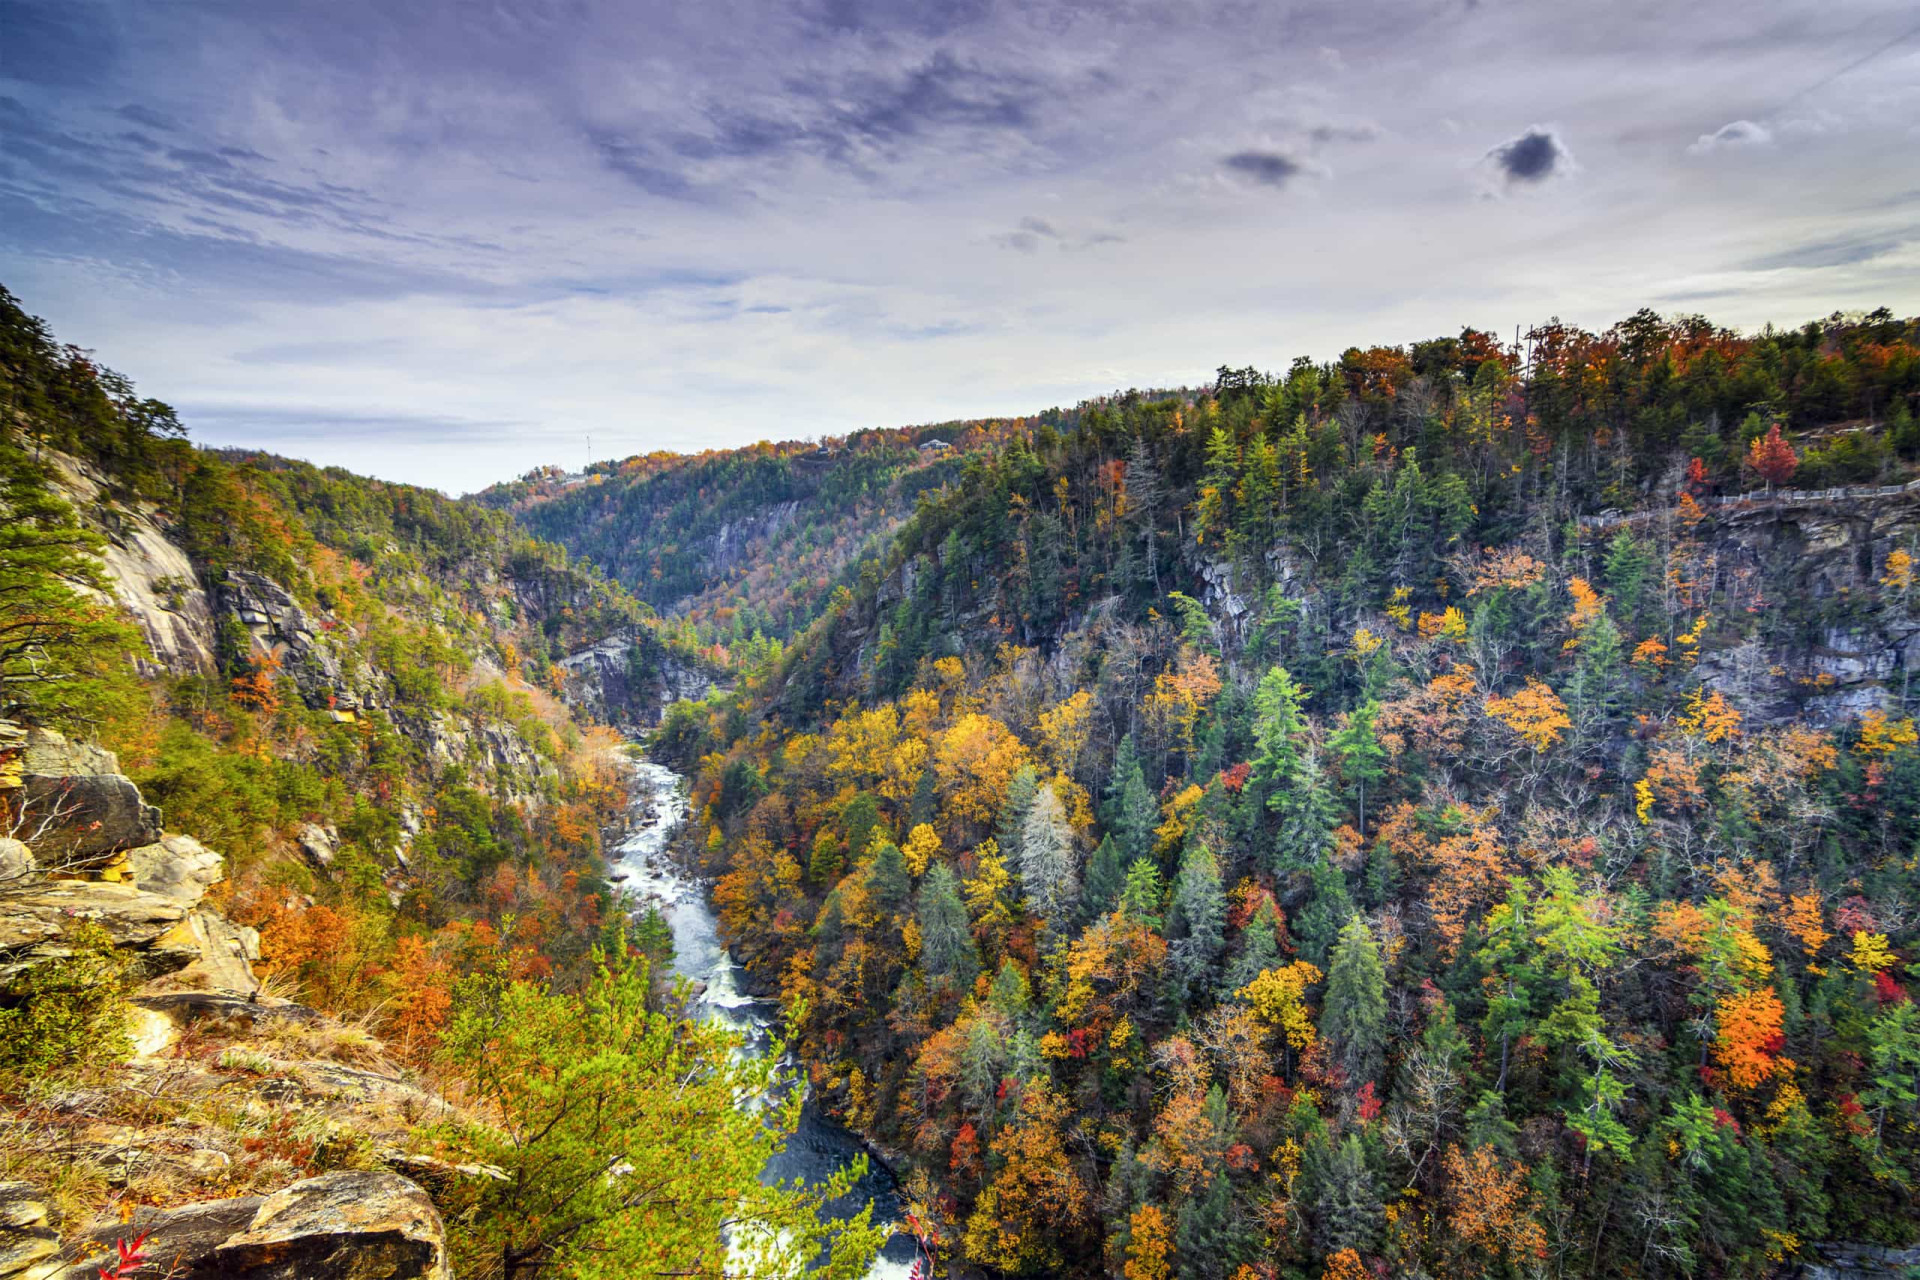 <p>One of the best spots in Georgia for outdoor activities, Tallulah Gorge State Park is a breathtaking place to spend time in nature. On the county line between Rabun and Habersham Counties, it's filled with crashing waterfalls and overlooks, as well as the mighty Tallulah Gorge itself.</p><p><a href="https://www.msn.com/en-us/community/channel/vid-7xx8mnucu55yw63we9va2gwr7uihbxwc68fxqp25x6tg4ftibpra?cvid=94631541bc0f4f89bfd59158d696ad7e">Follow us and access great exclusive content every day</a></p>